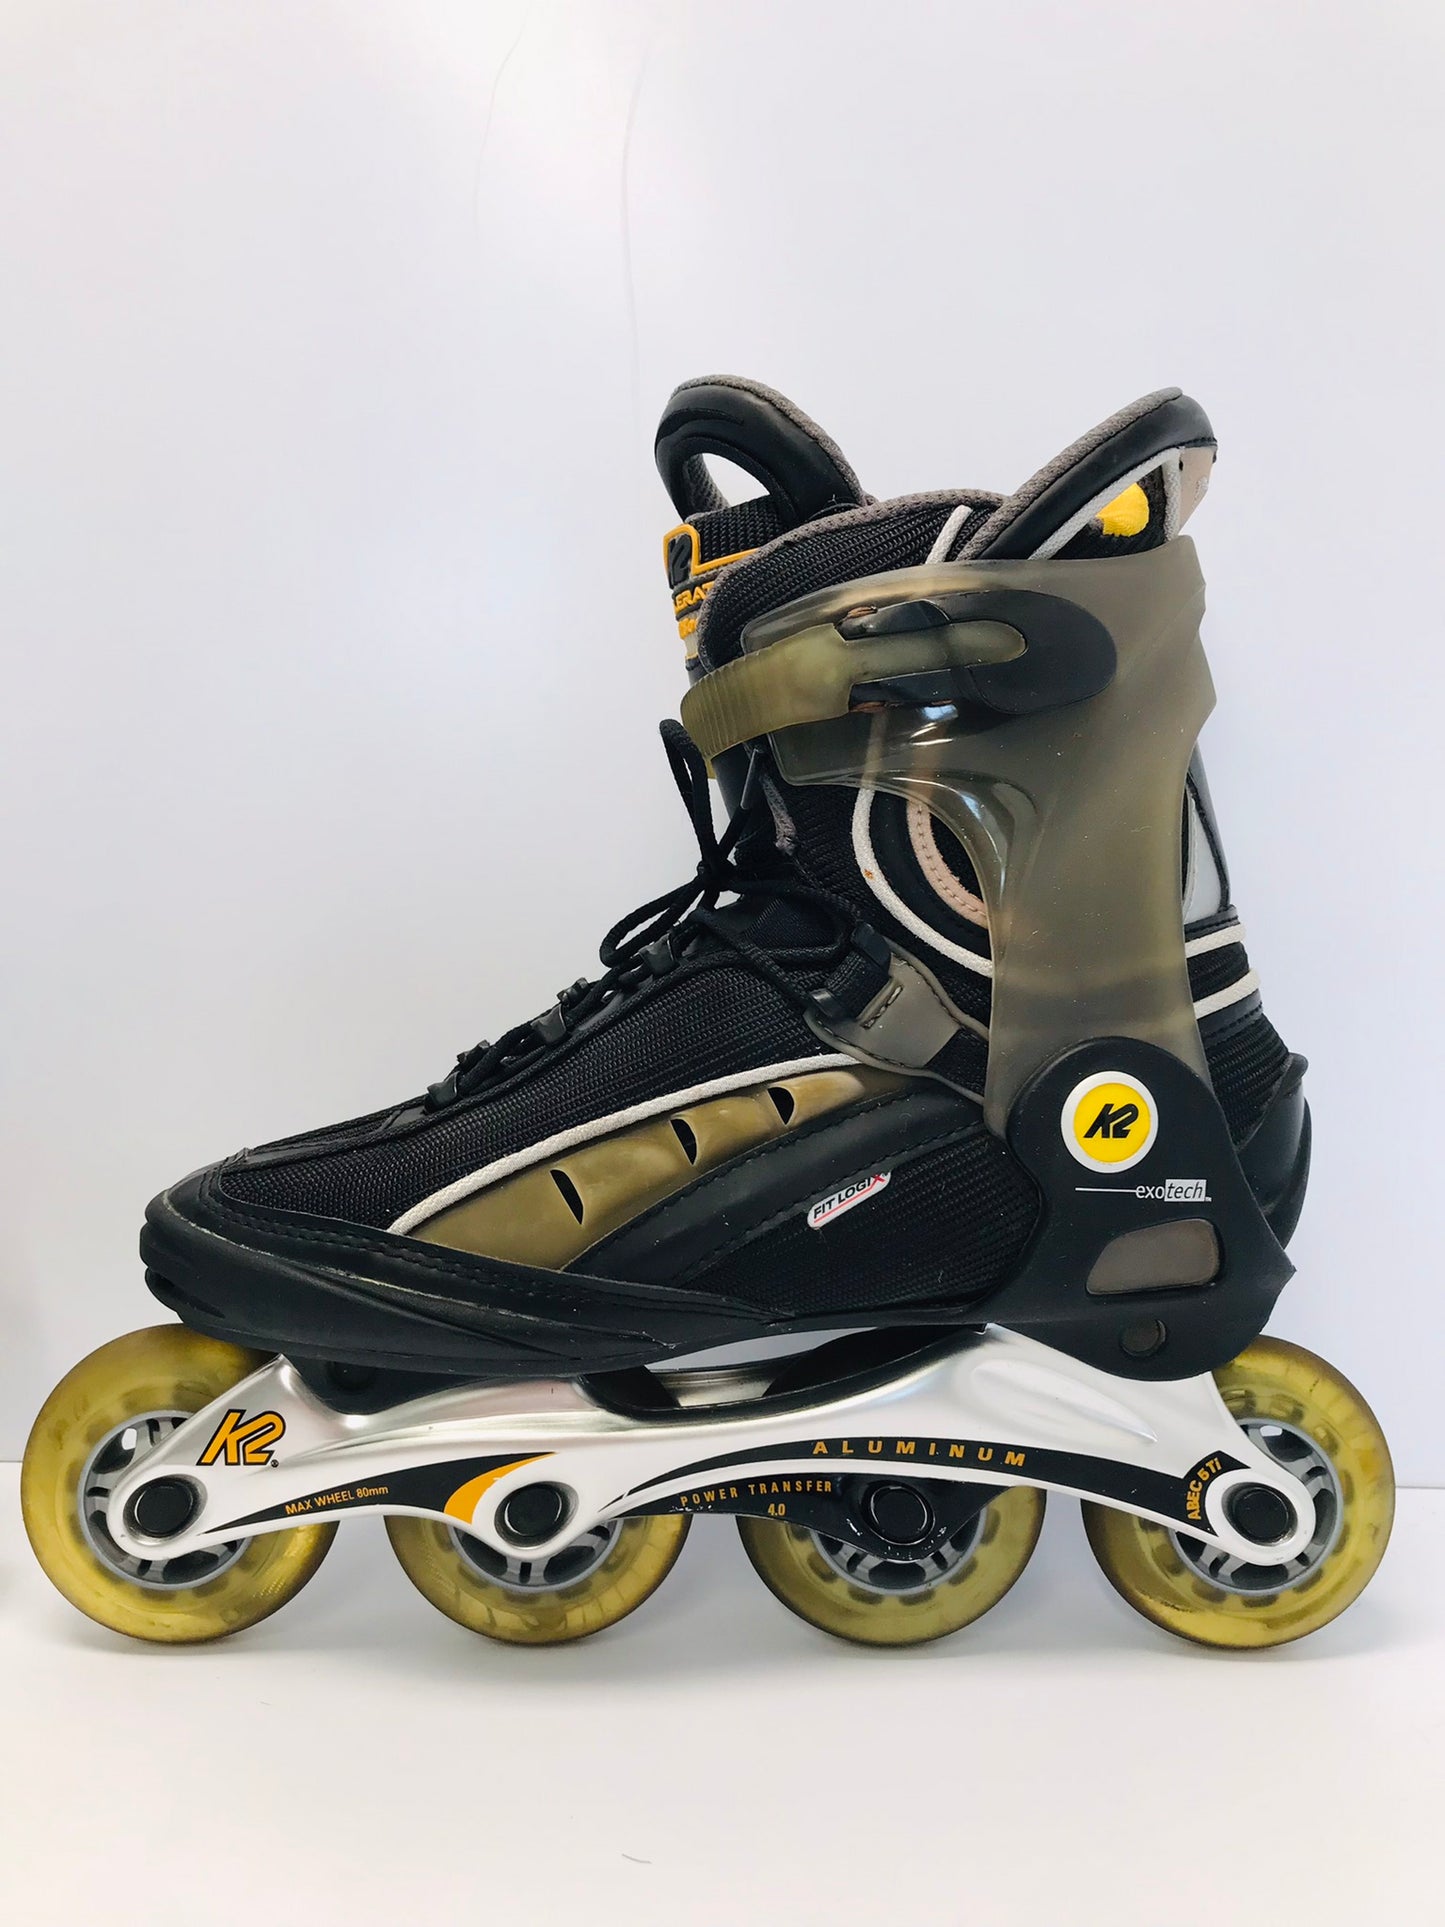 Inline Roller Skates Men's Size 8 K-2 With Rubber Wheels Used Once